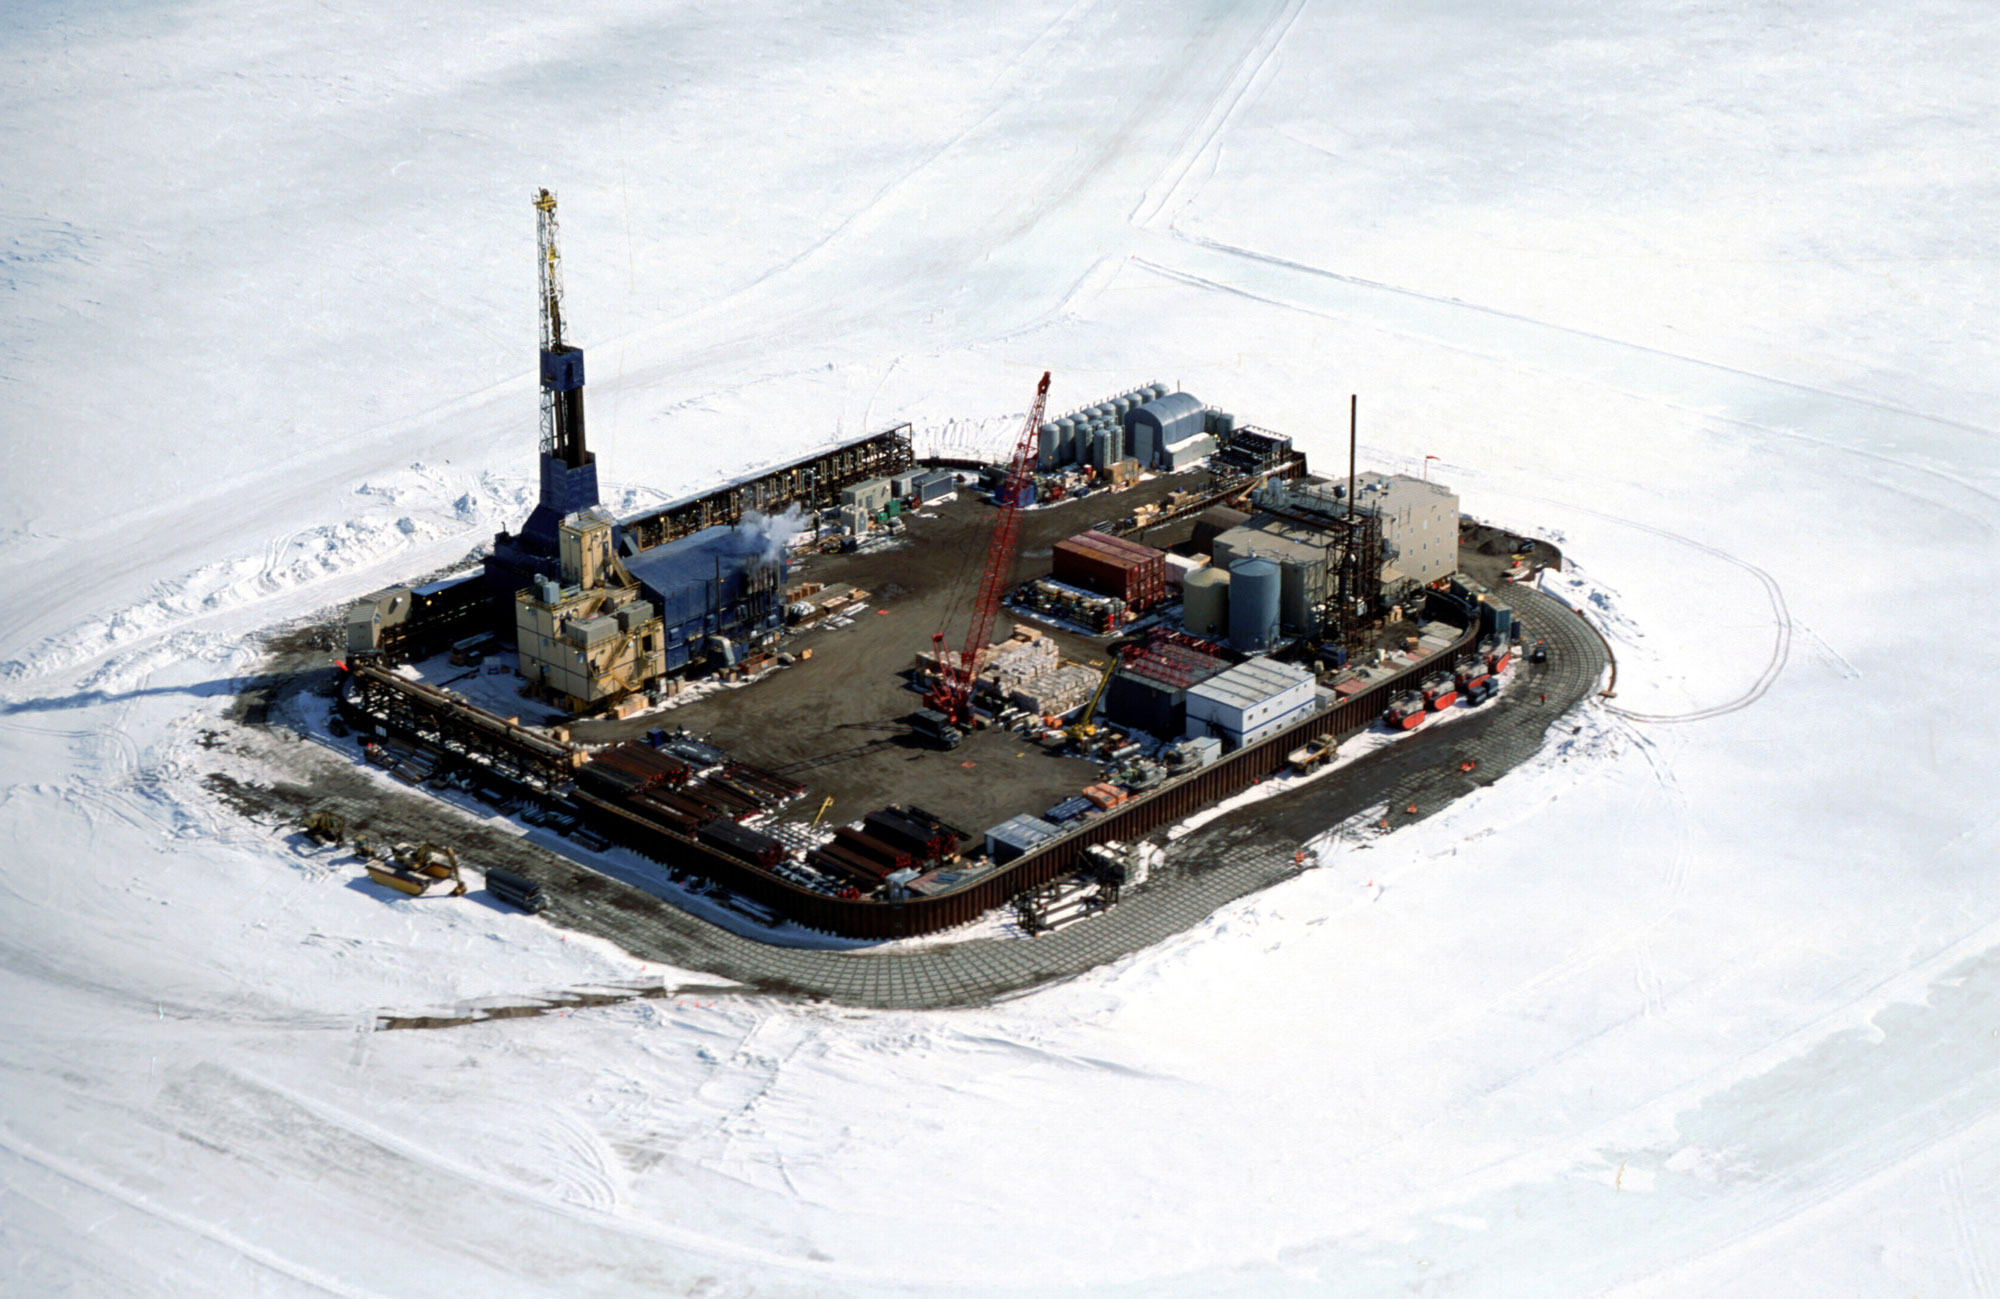 Aerial photograph of Northstar Island, a man-made island in the Beaufort Sea that supports oil extraction equipment. The photo shows a rectangular island with a drill rig and other equipment on it. The island is surrounded by sea ice covered in a thin layer of snow.